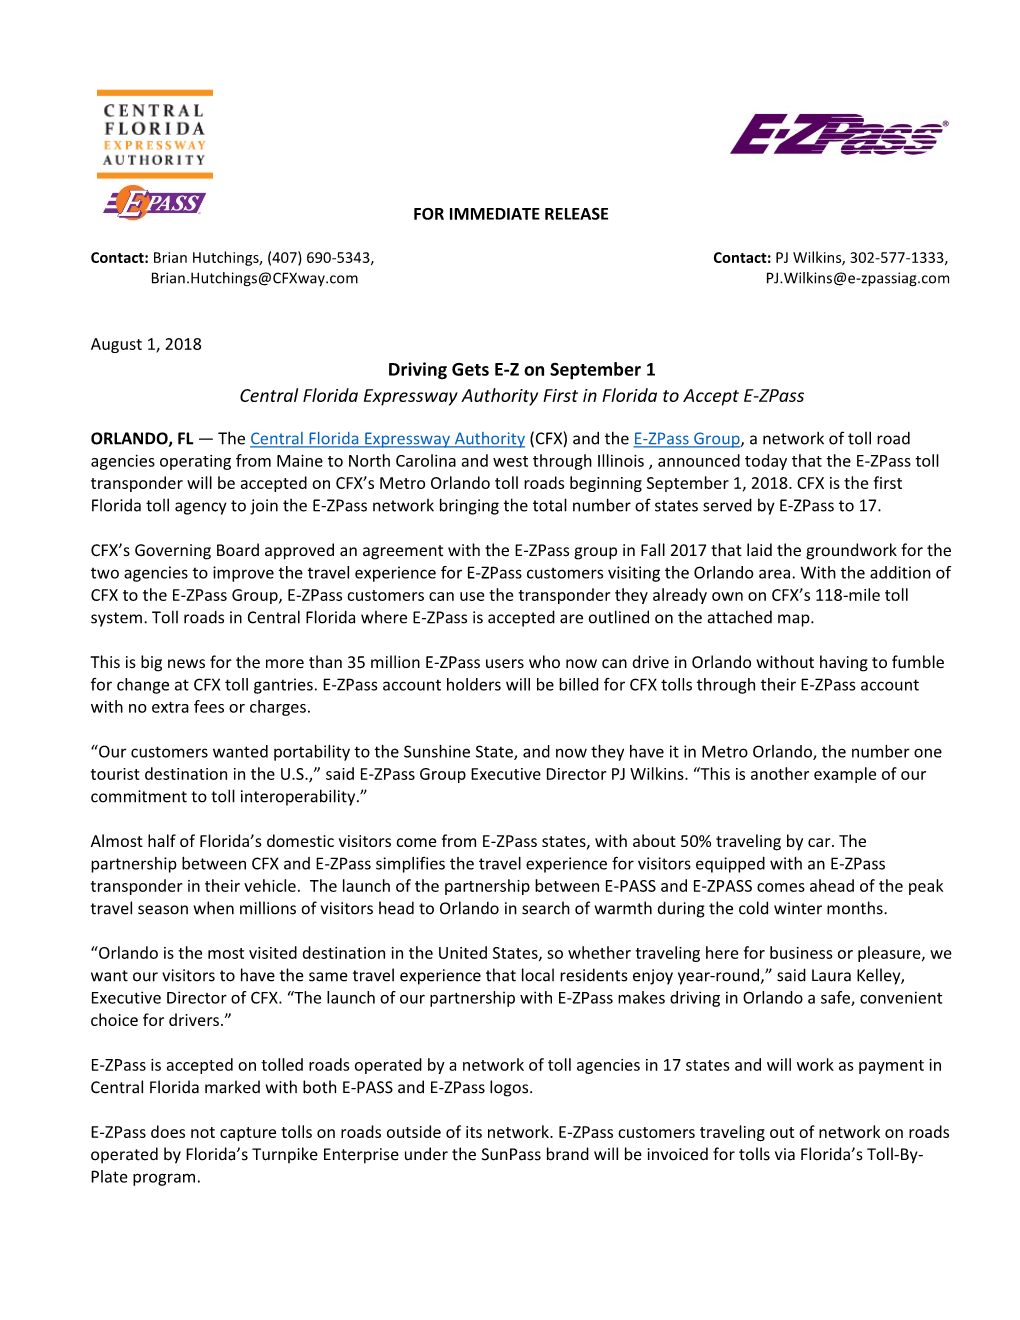 Driving Gets E-Z on September 1 Central Florida Expressway Authority First in Florida to Accept E-Zpass